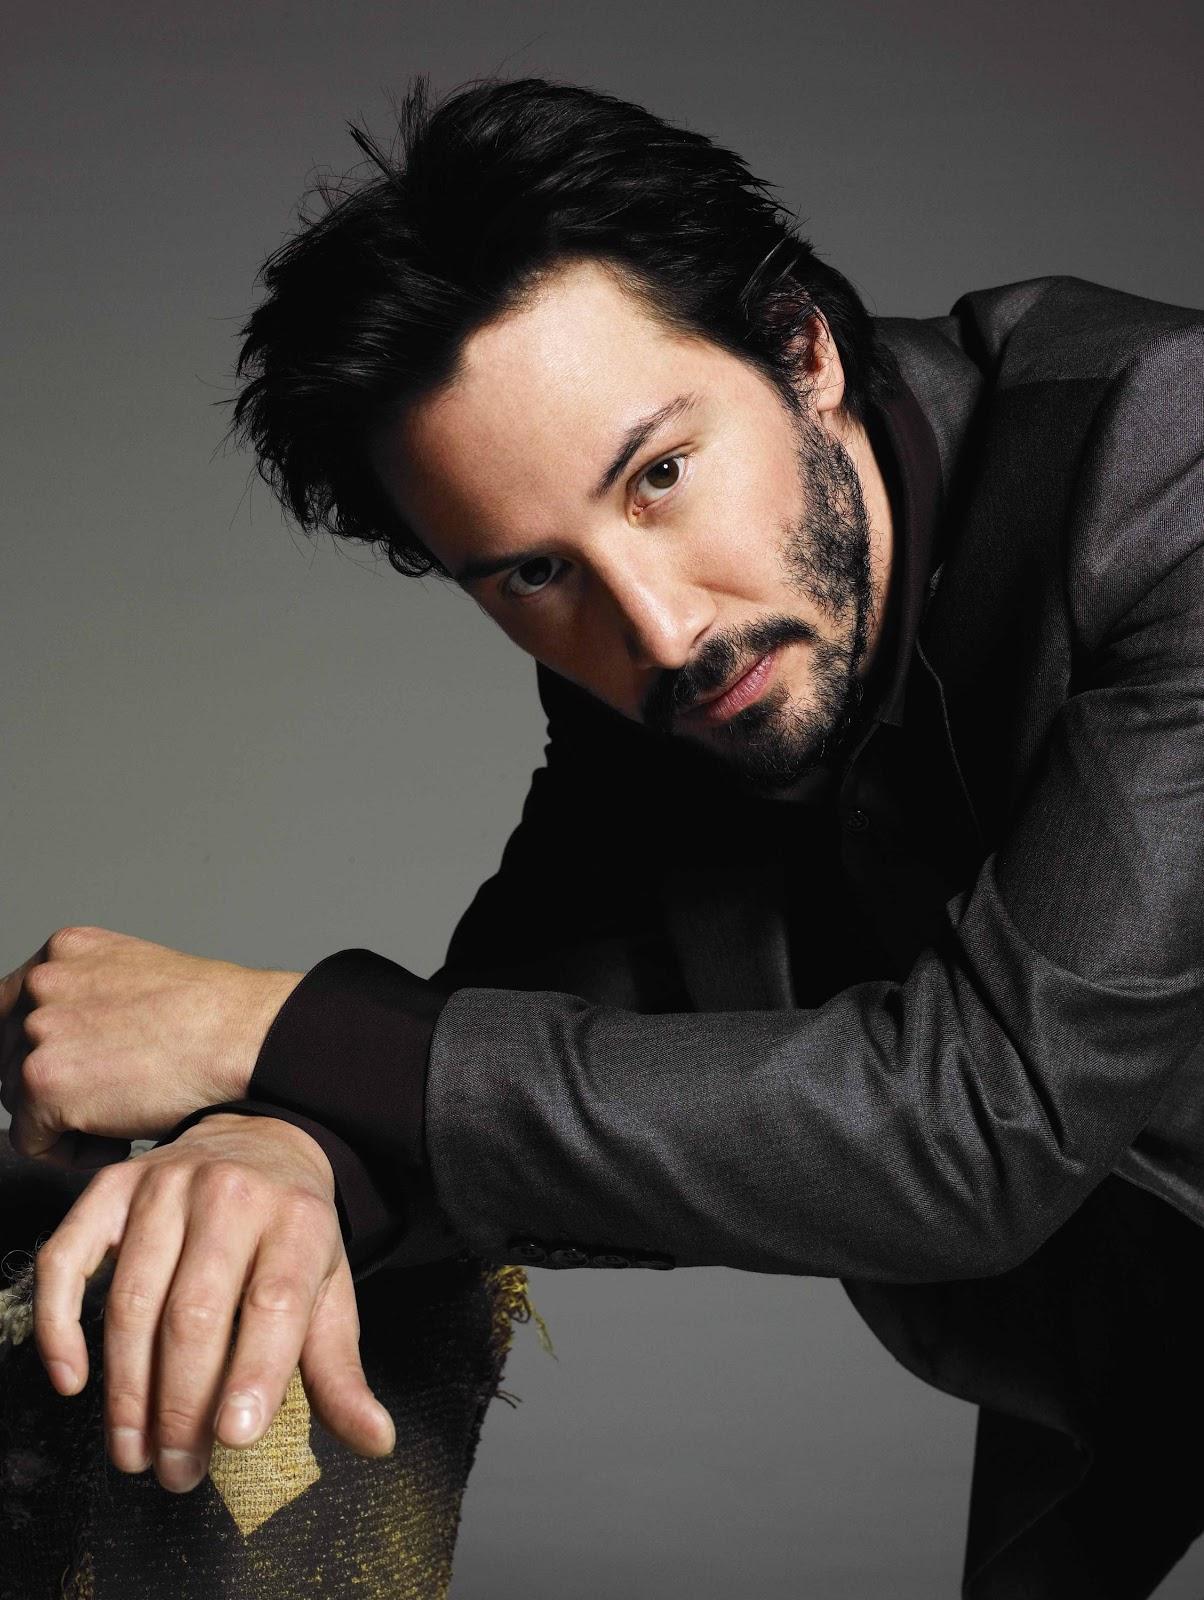 Best Keanu Reeves HD Wallpaper and Photo. Liberty